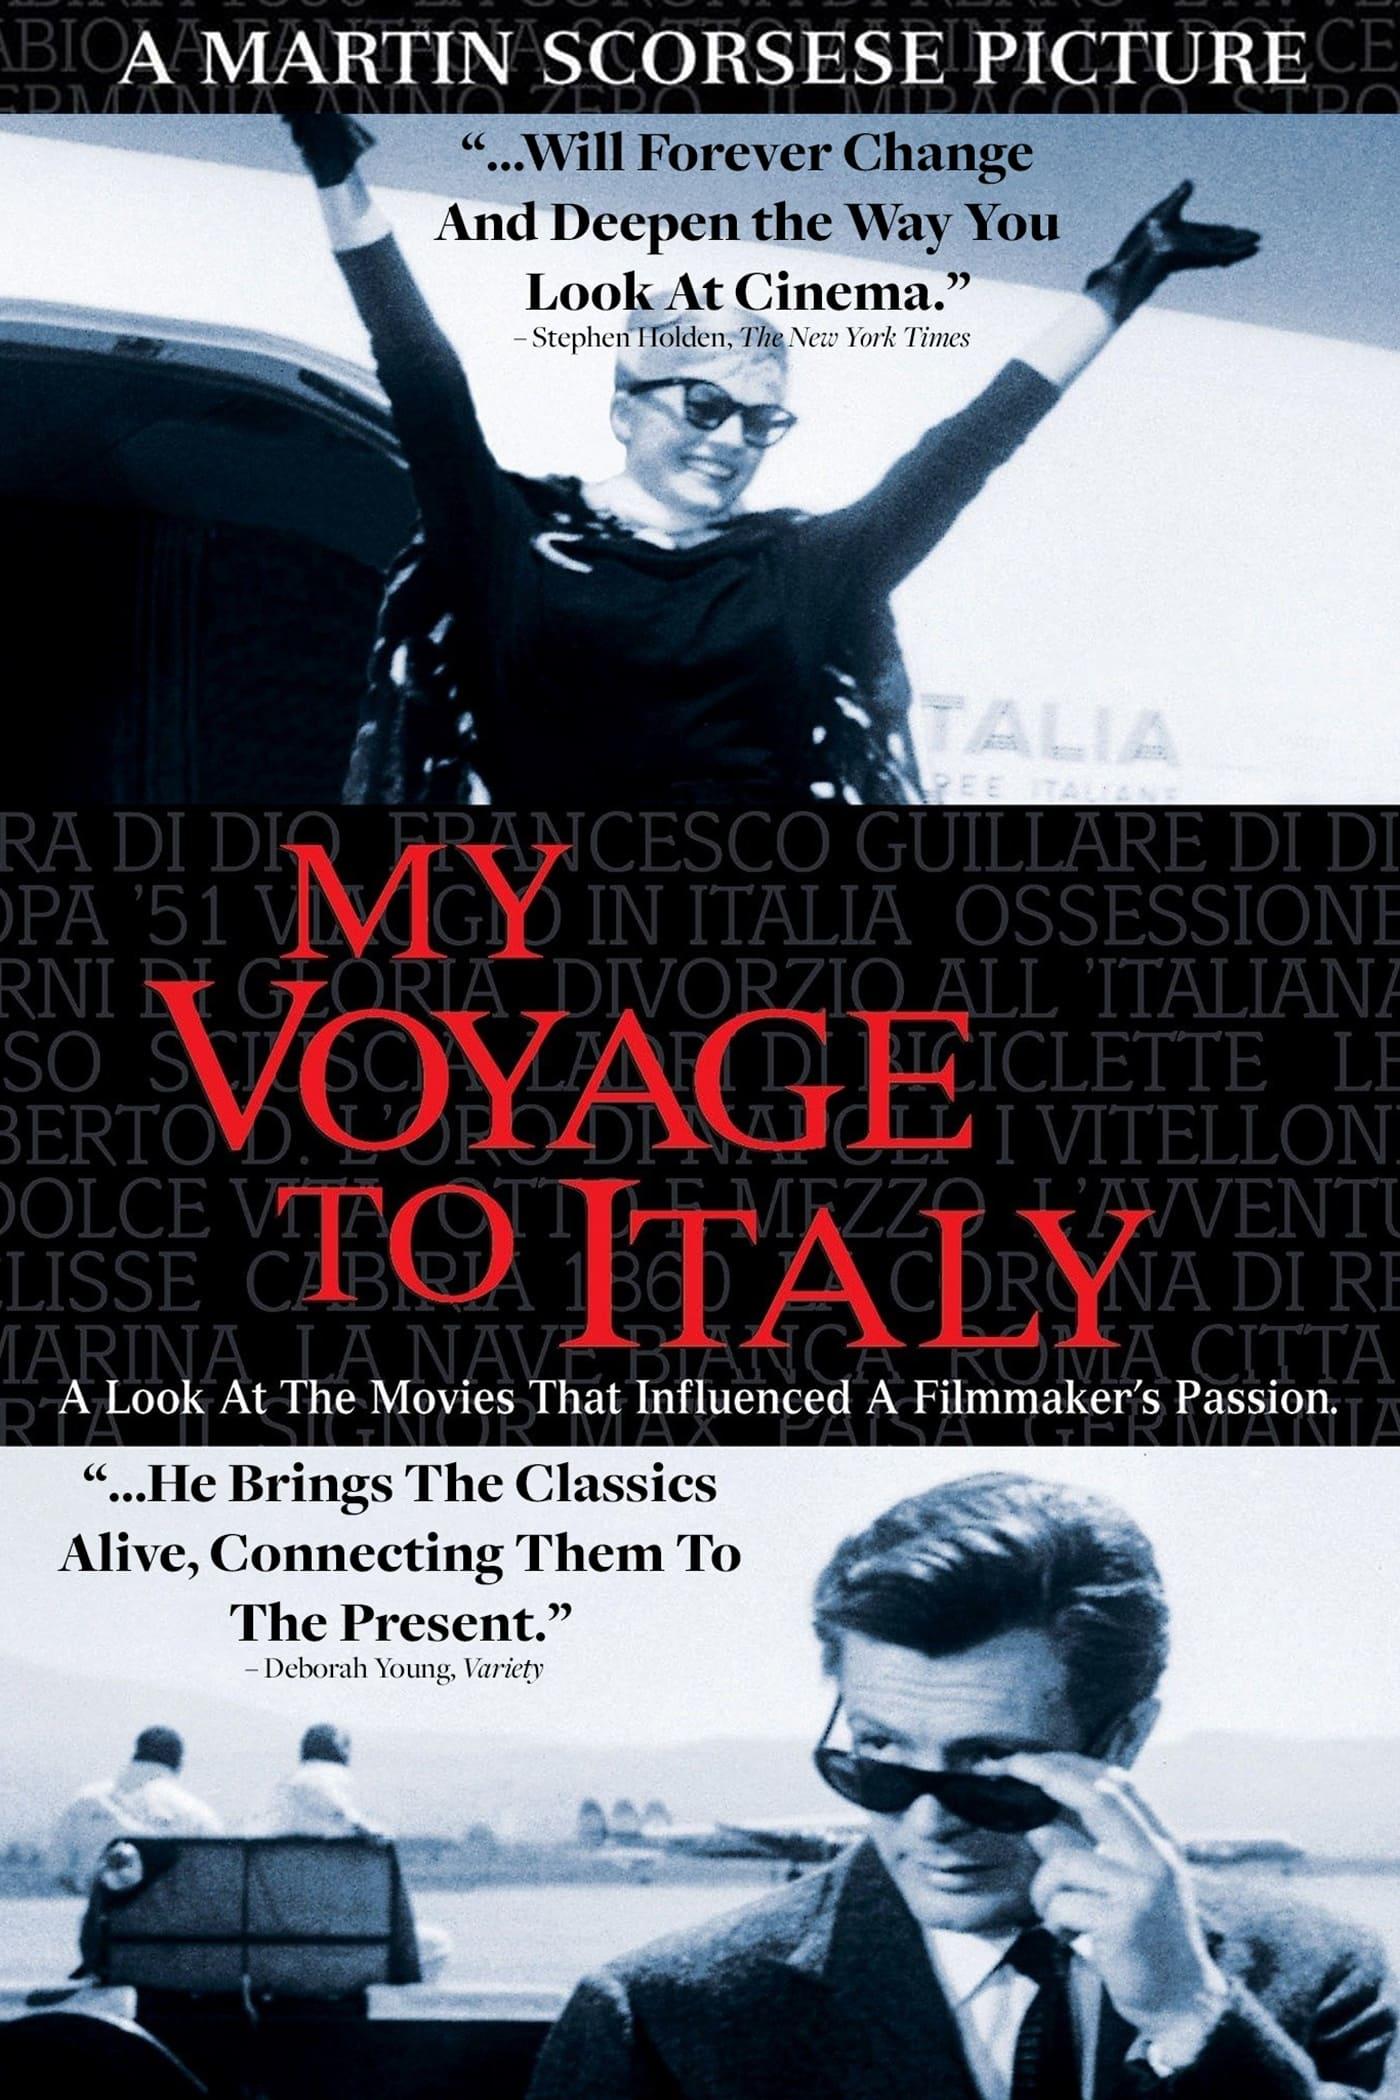 My Voyage to Italy poster